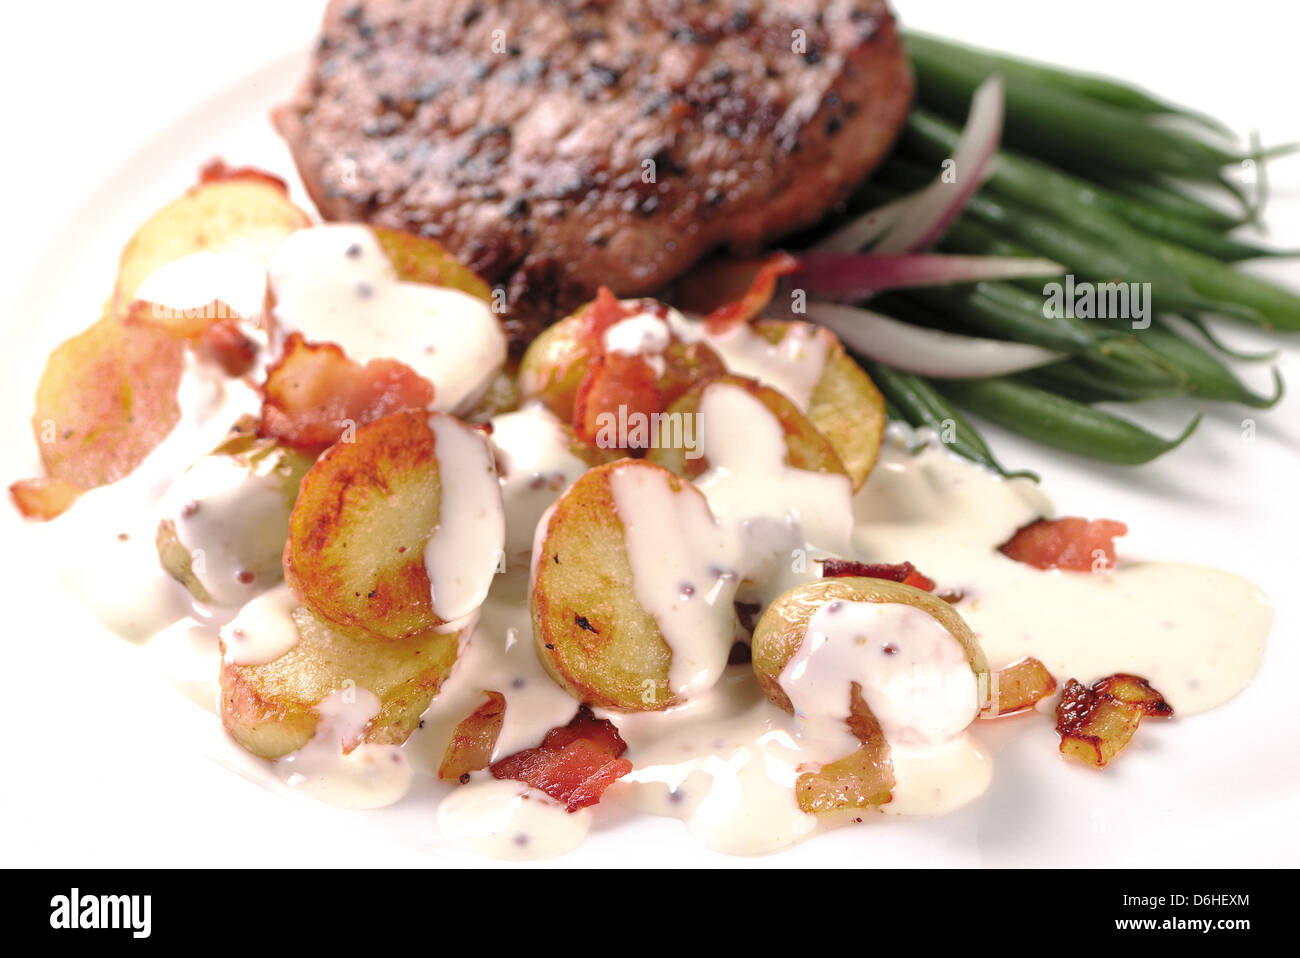 Saucy potatoes, steak and french beans Stock Photo